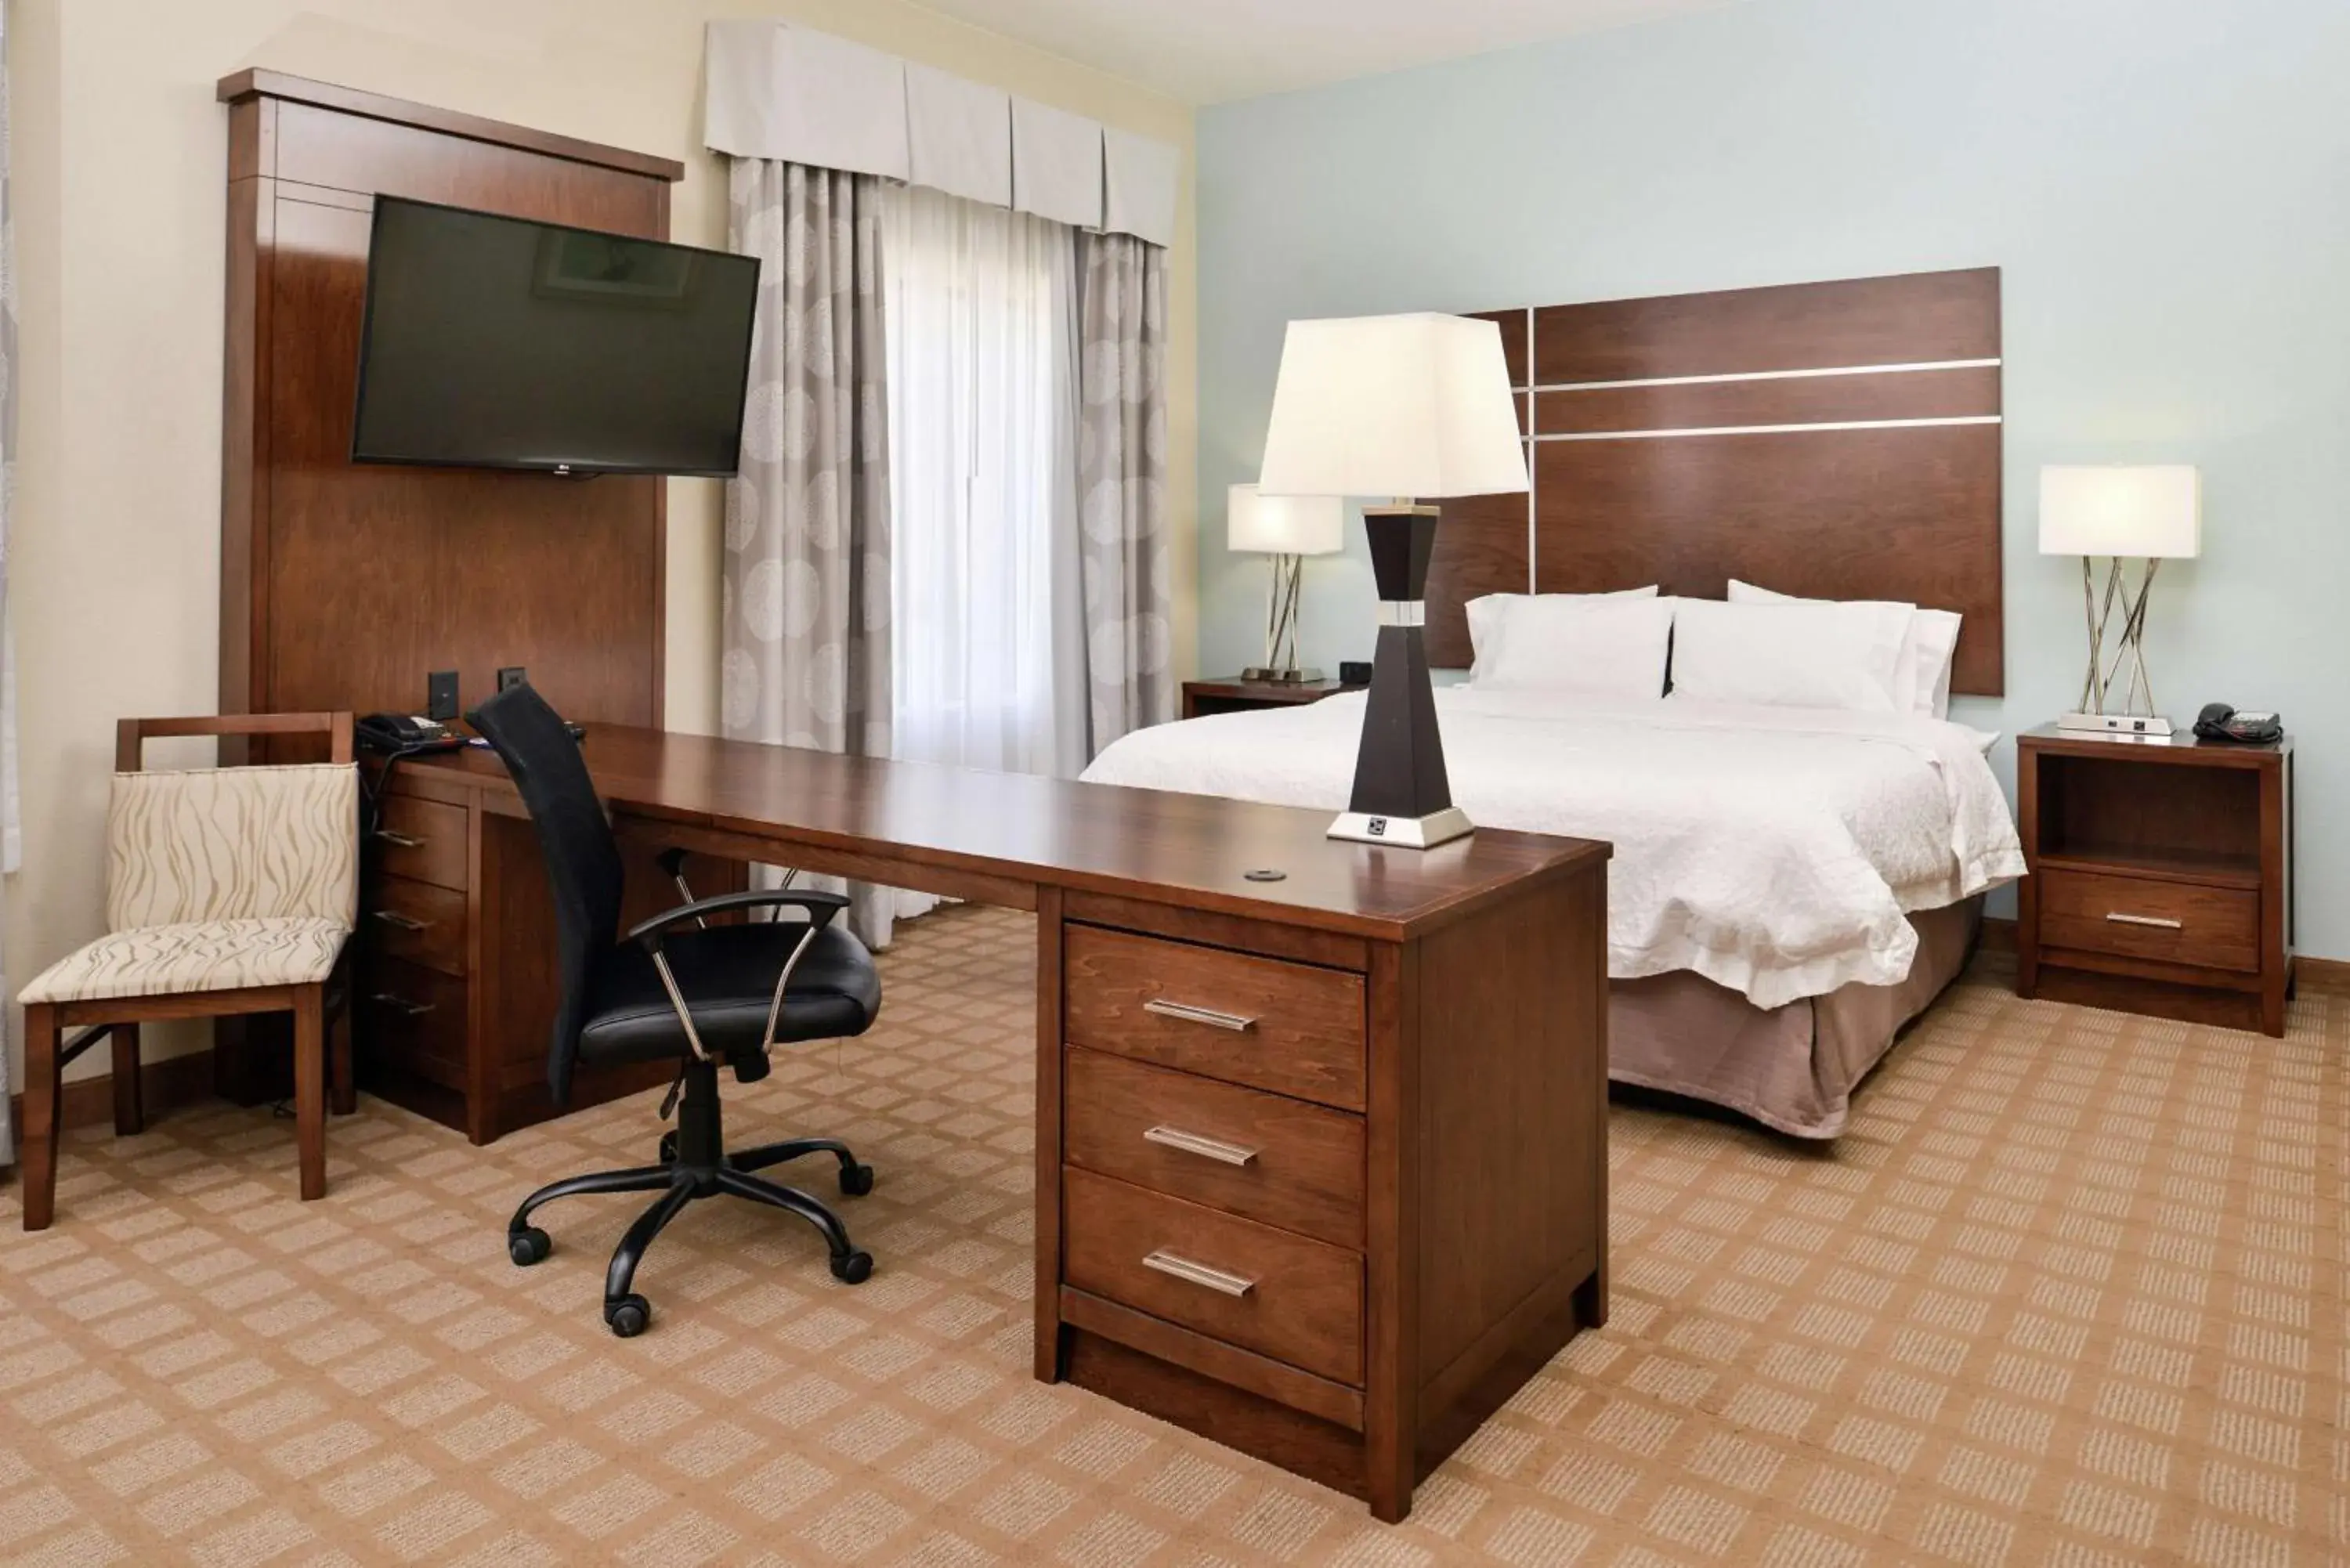 Bedroom in Hampton Inn and Suites Hutto